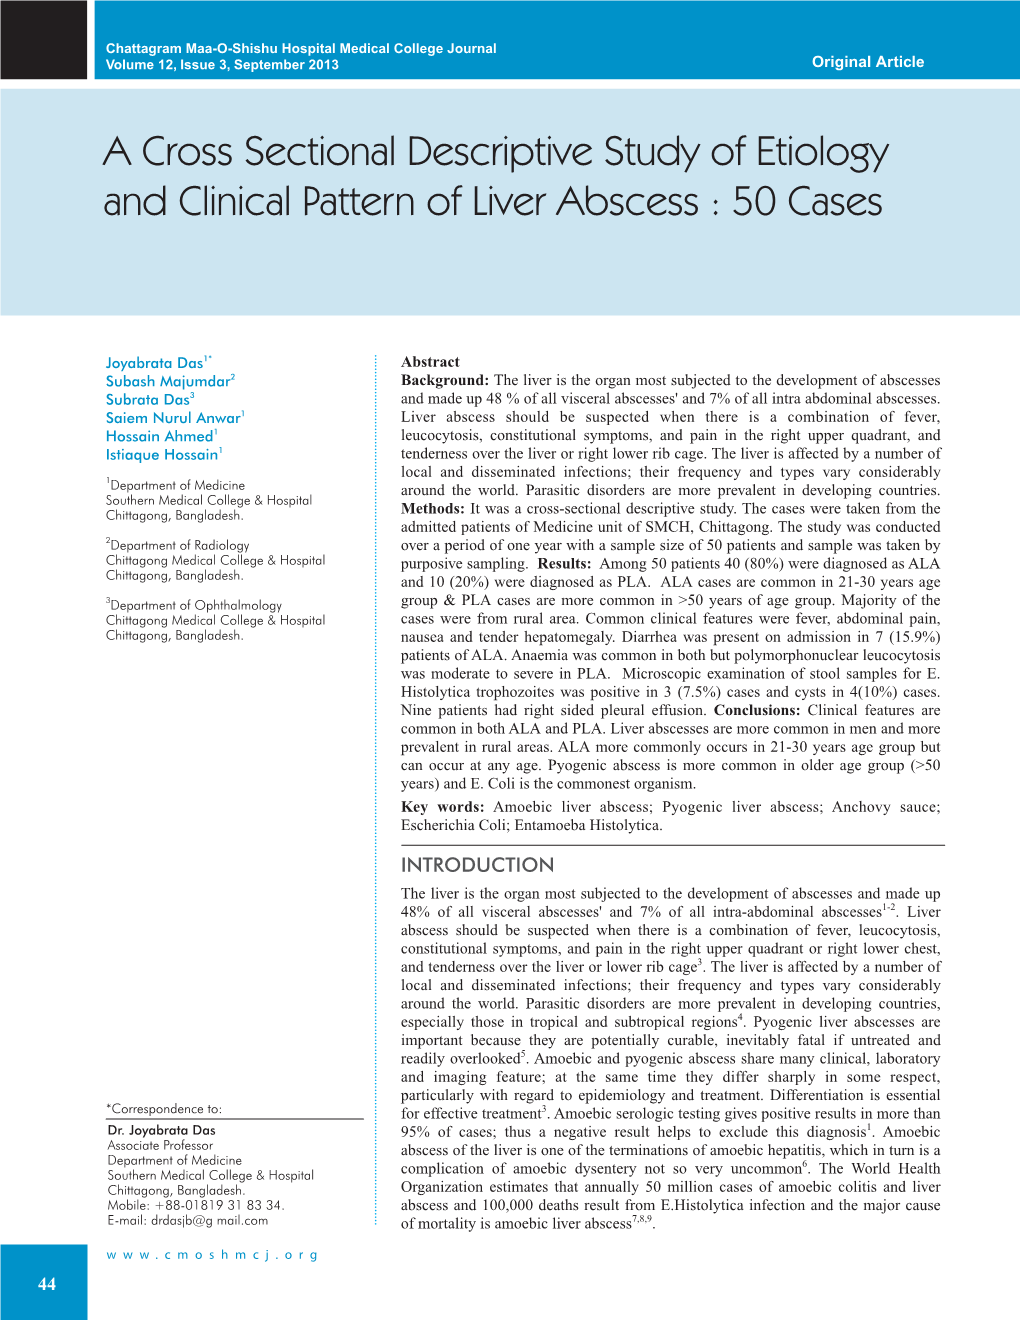 A Cross Sectional Descriptive Study of Etiology and Clinical Pattern of Liver Abscess : 50 Cases